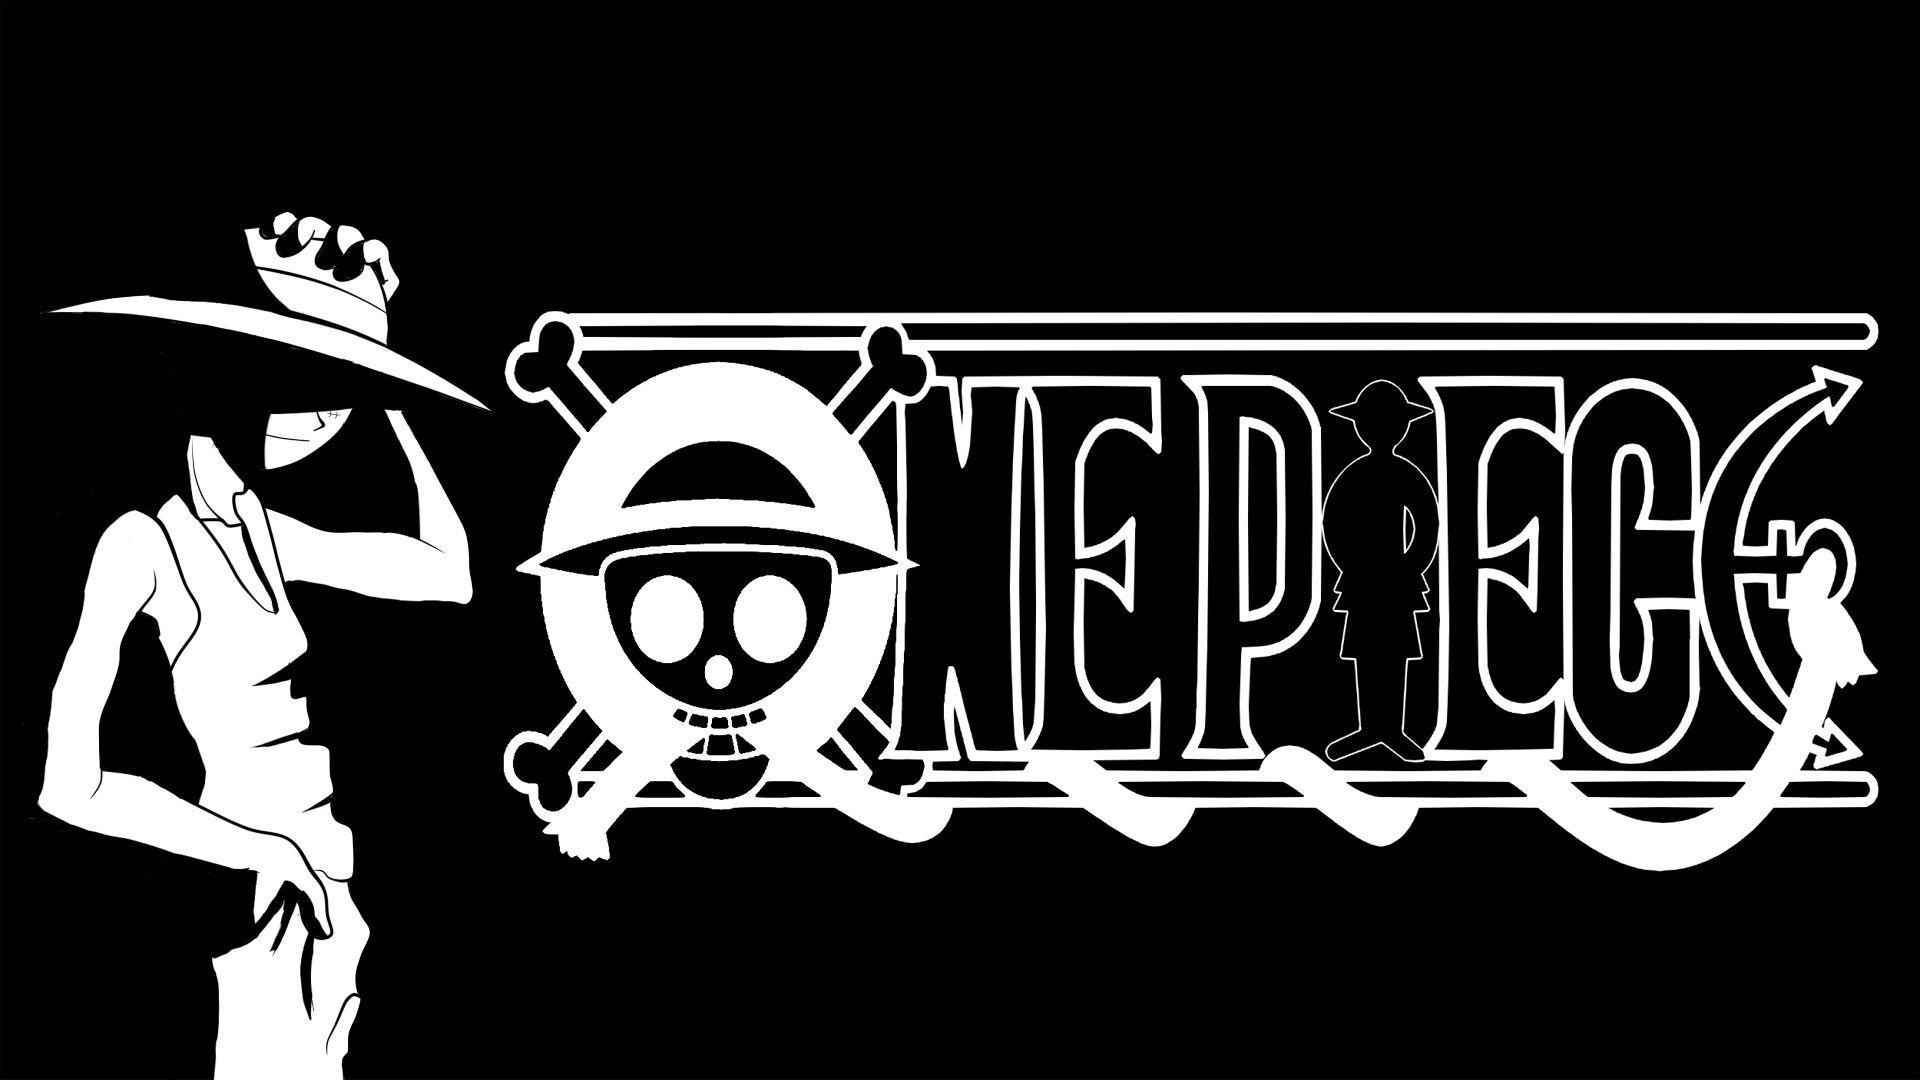 HD wallpaper Anime One Piece Logo communication text sign neon blue   Wallpaper Flare